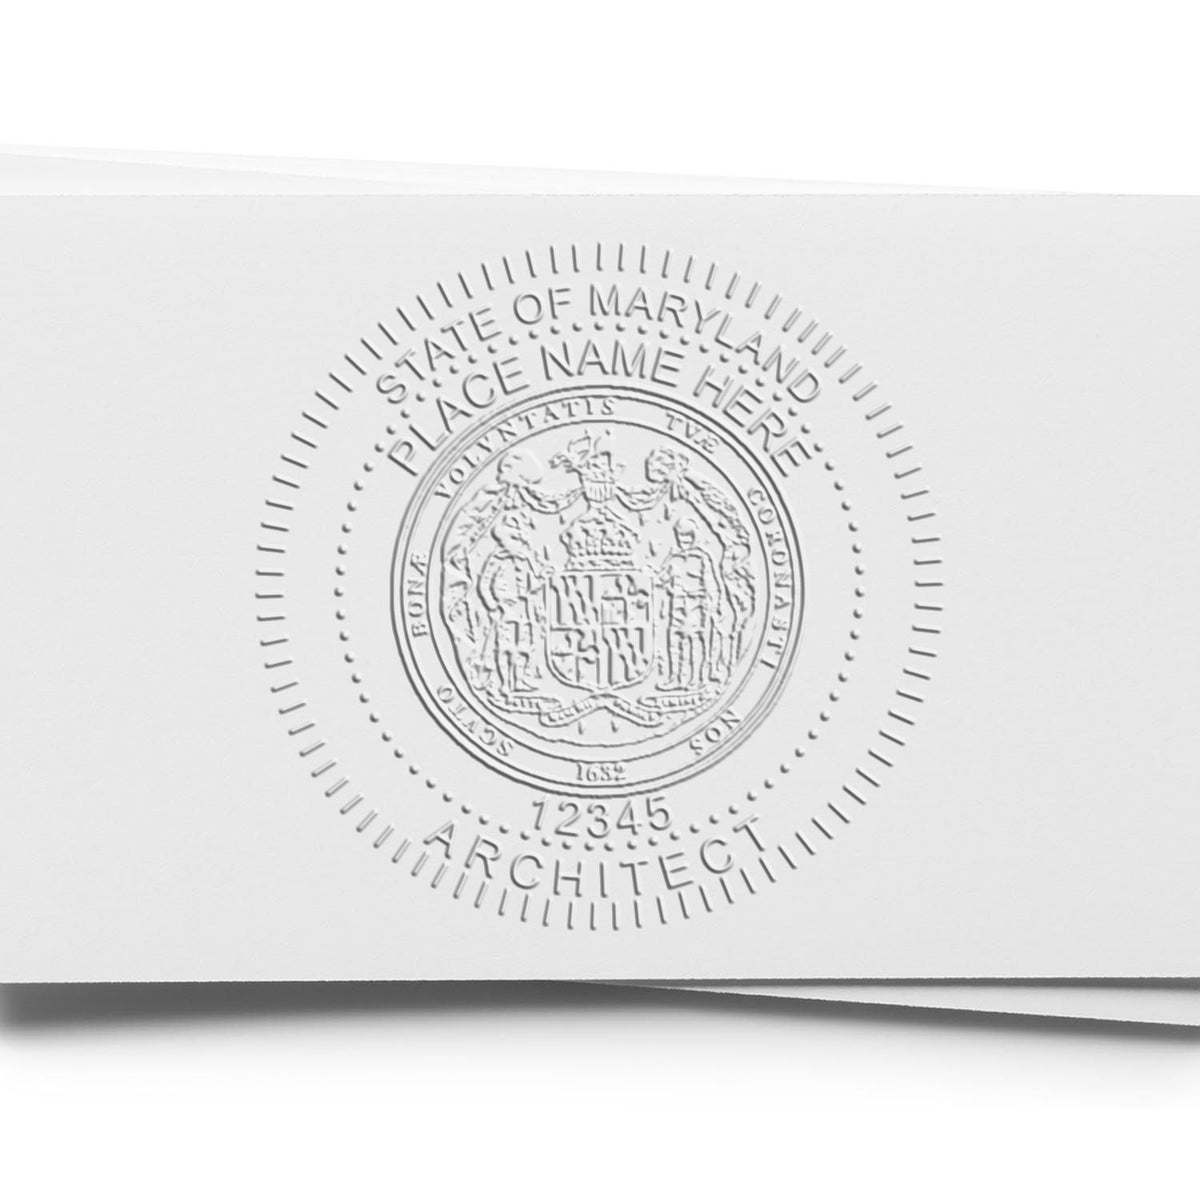 The State of Maryland Architectural Seal Embosser stamp impression comes to life with a crisp, detailed photo on paper - showcasing true professional quality.